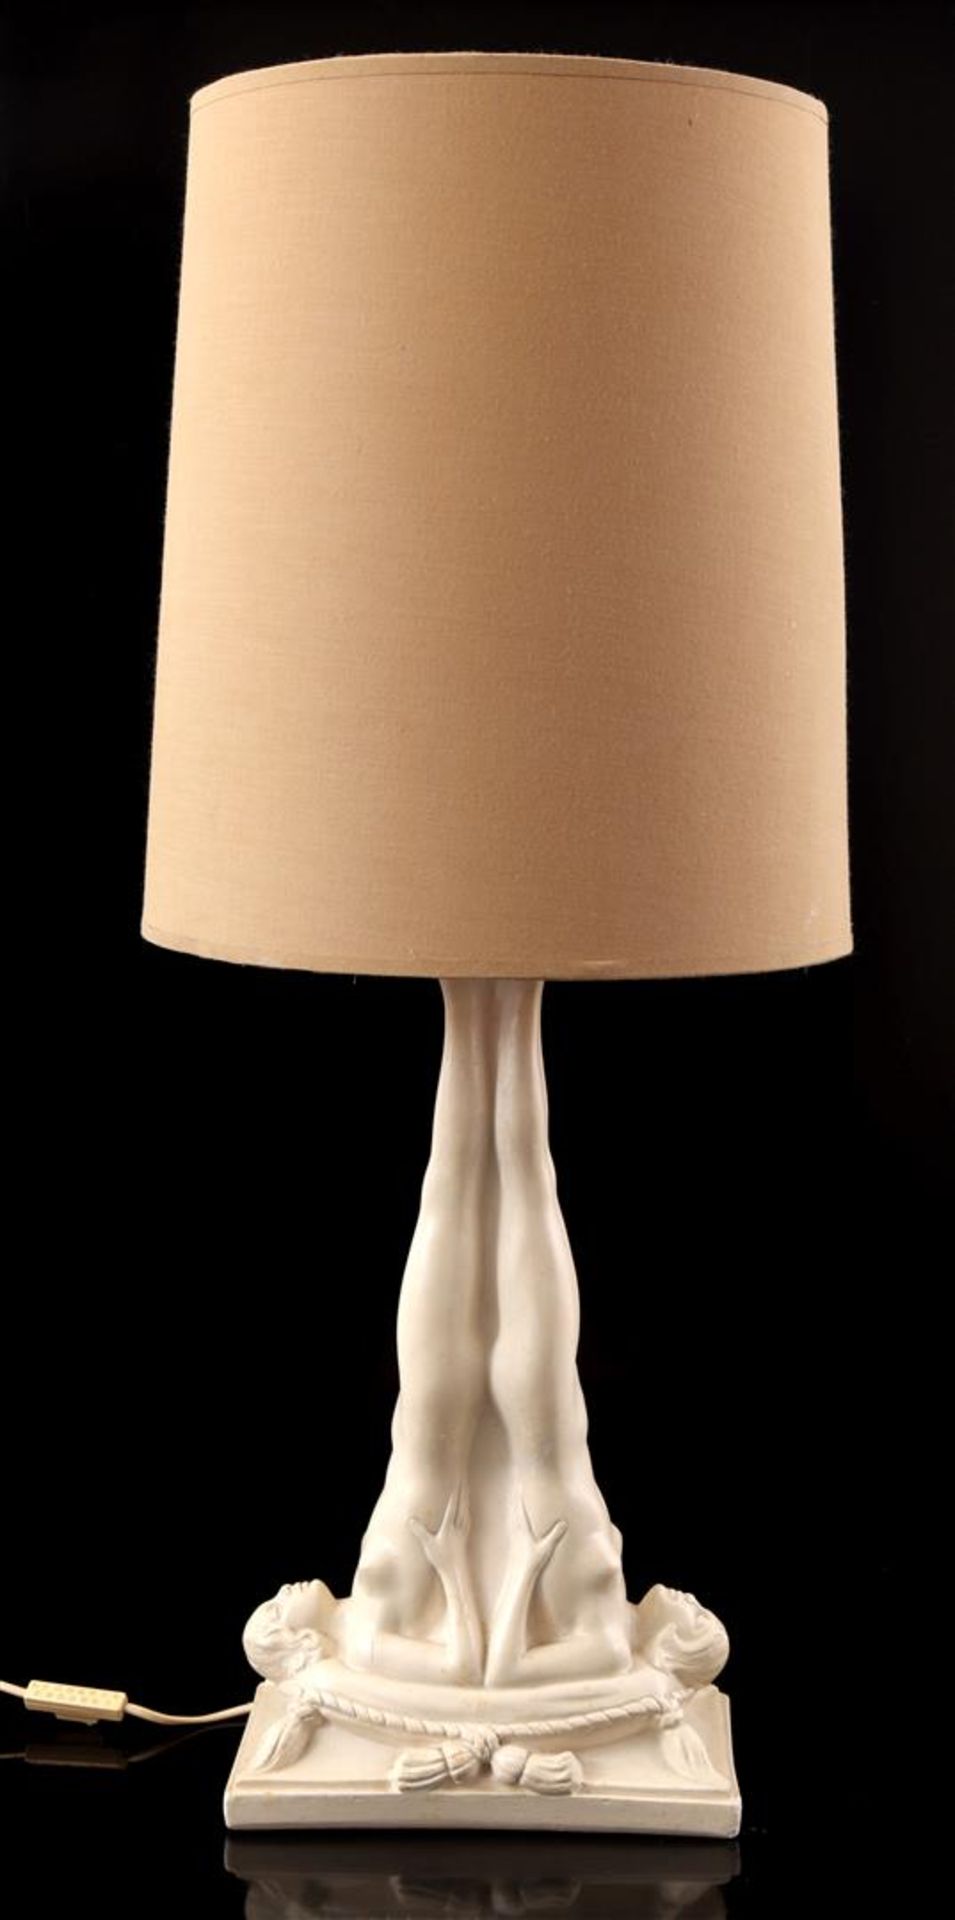 Plaster table table lamp